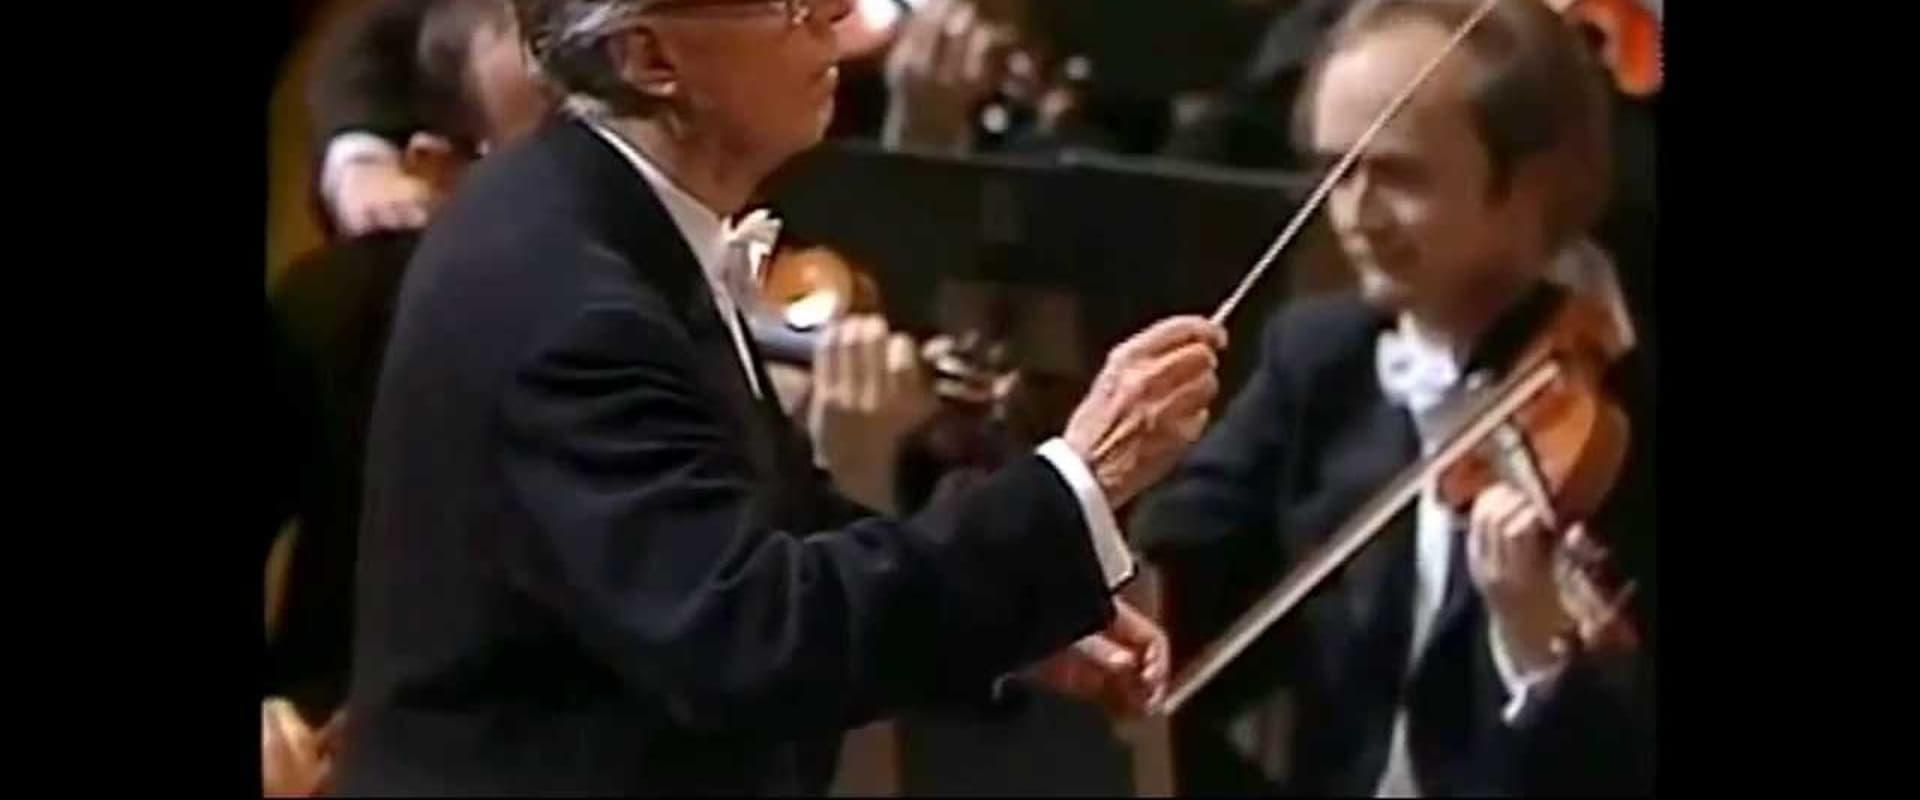 The Art of Conducting: Great Conductors of the Past